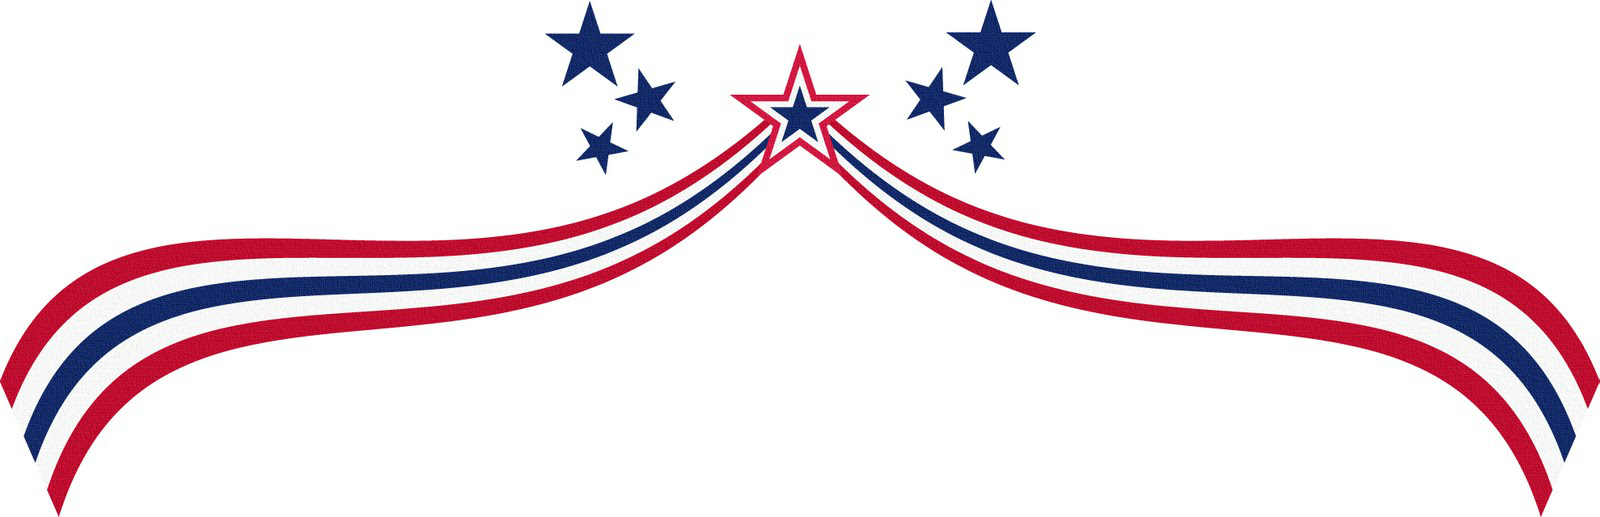 clipart on independence day - photo #18